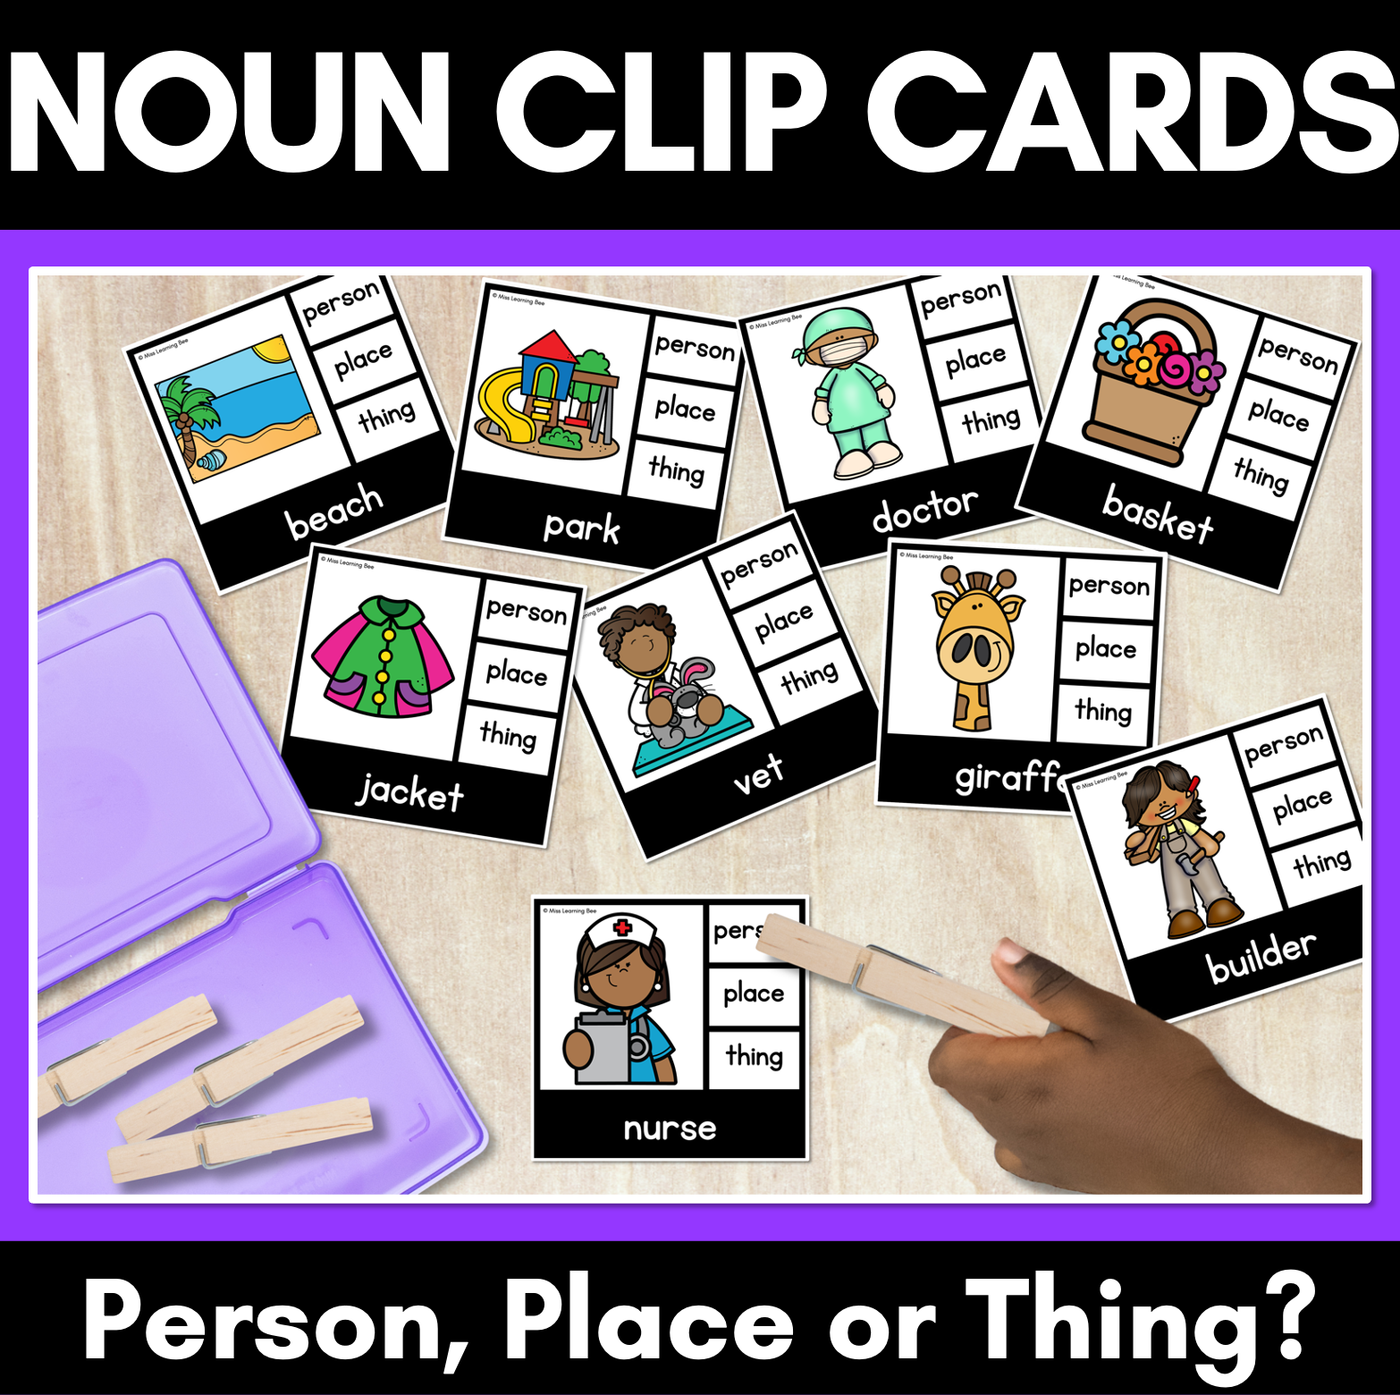 Types of Noun Clip Cards - Person Place or Thing - LOW PREP GRAMMAR ACTIVITY